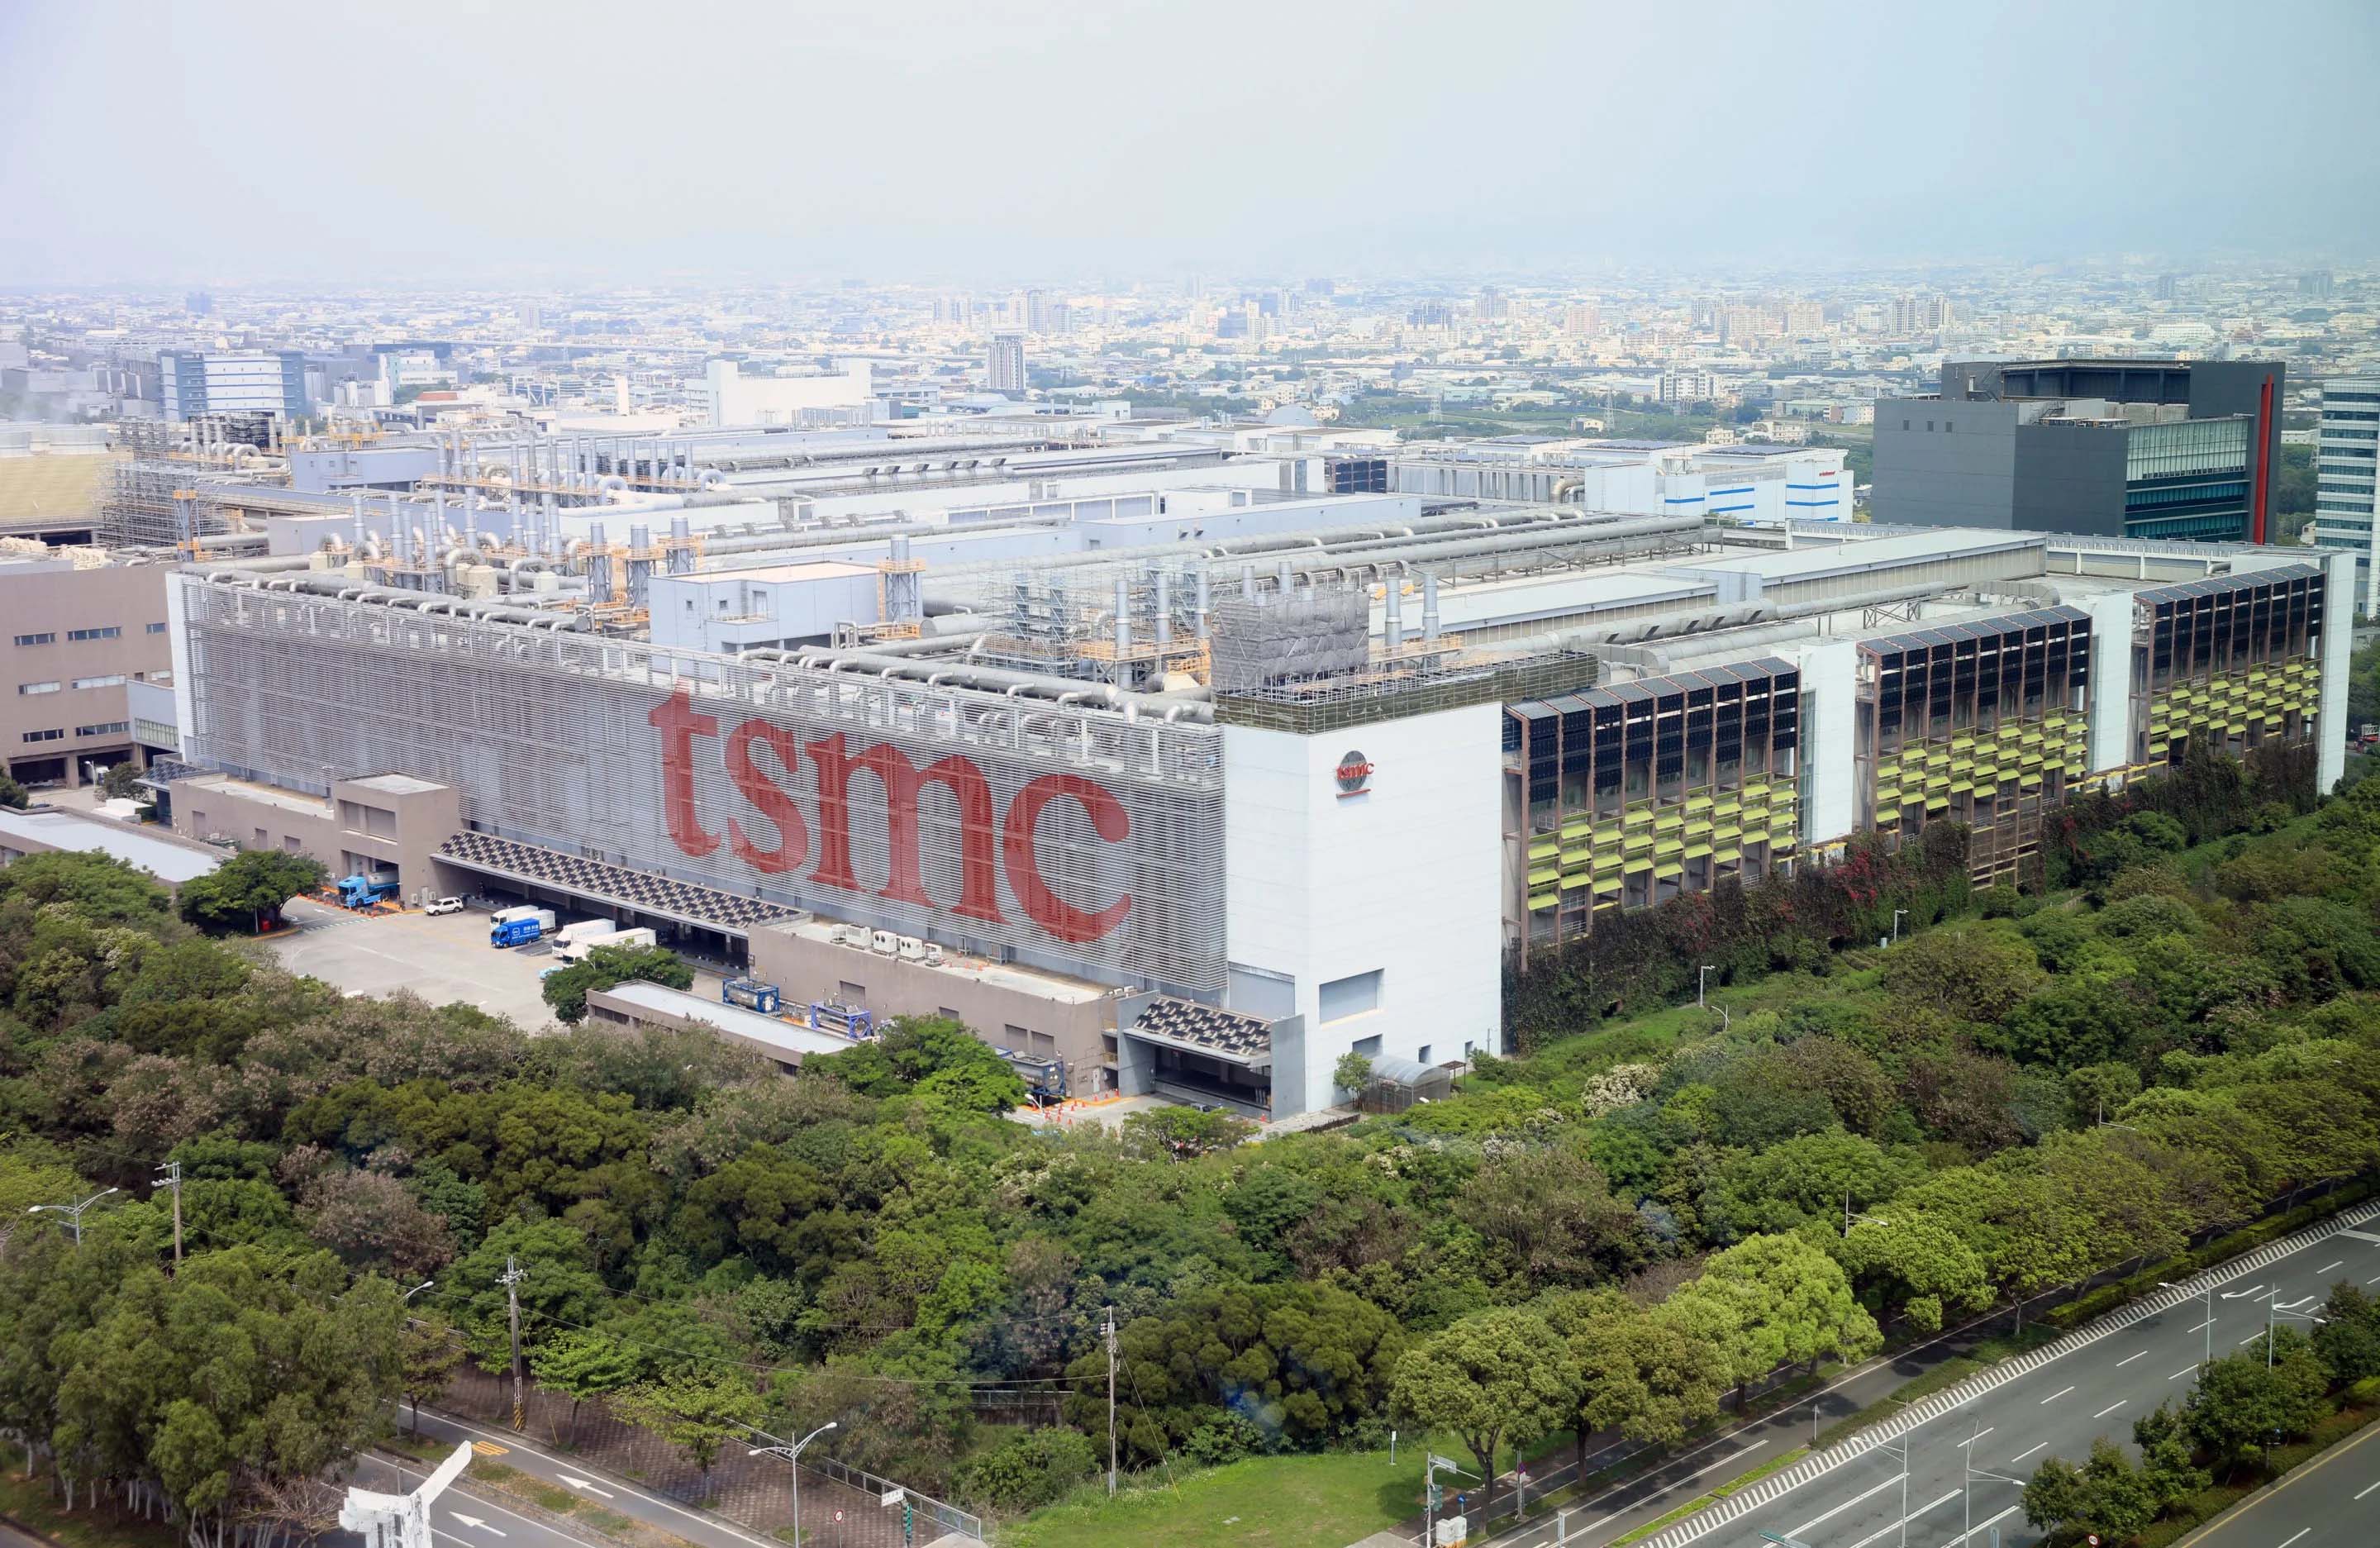  An aerial view of TSMC's chip manufacturing facilities outside Taiwan.